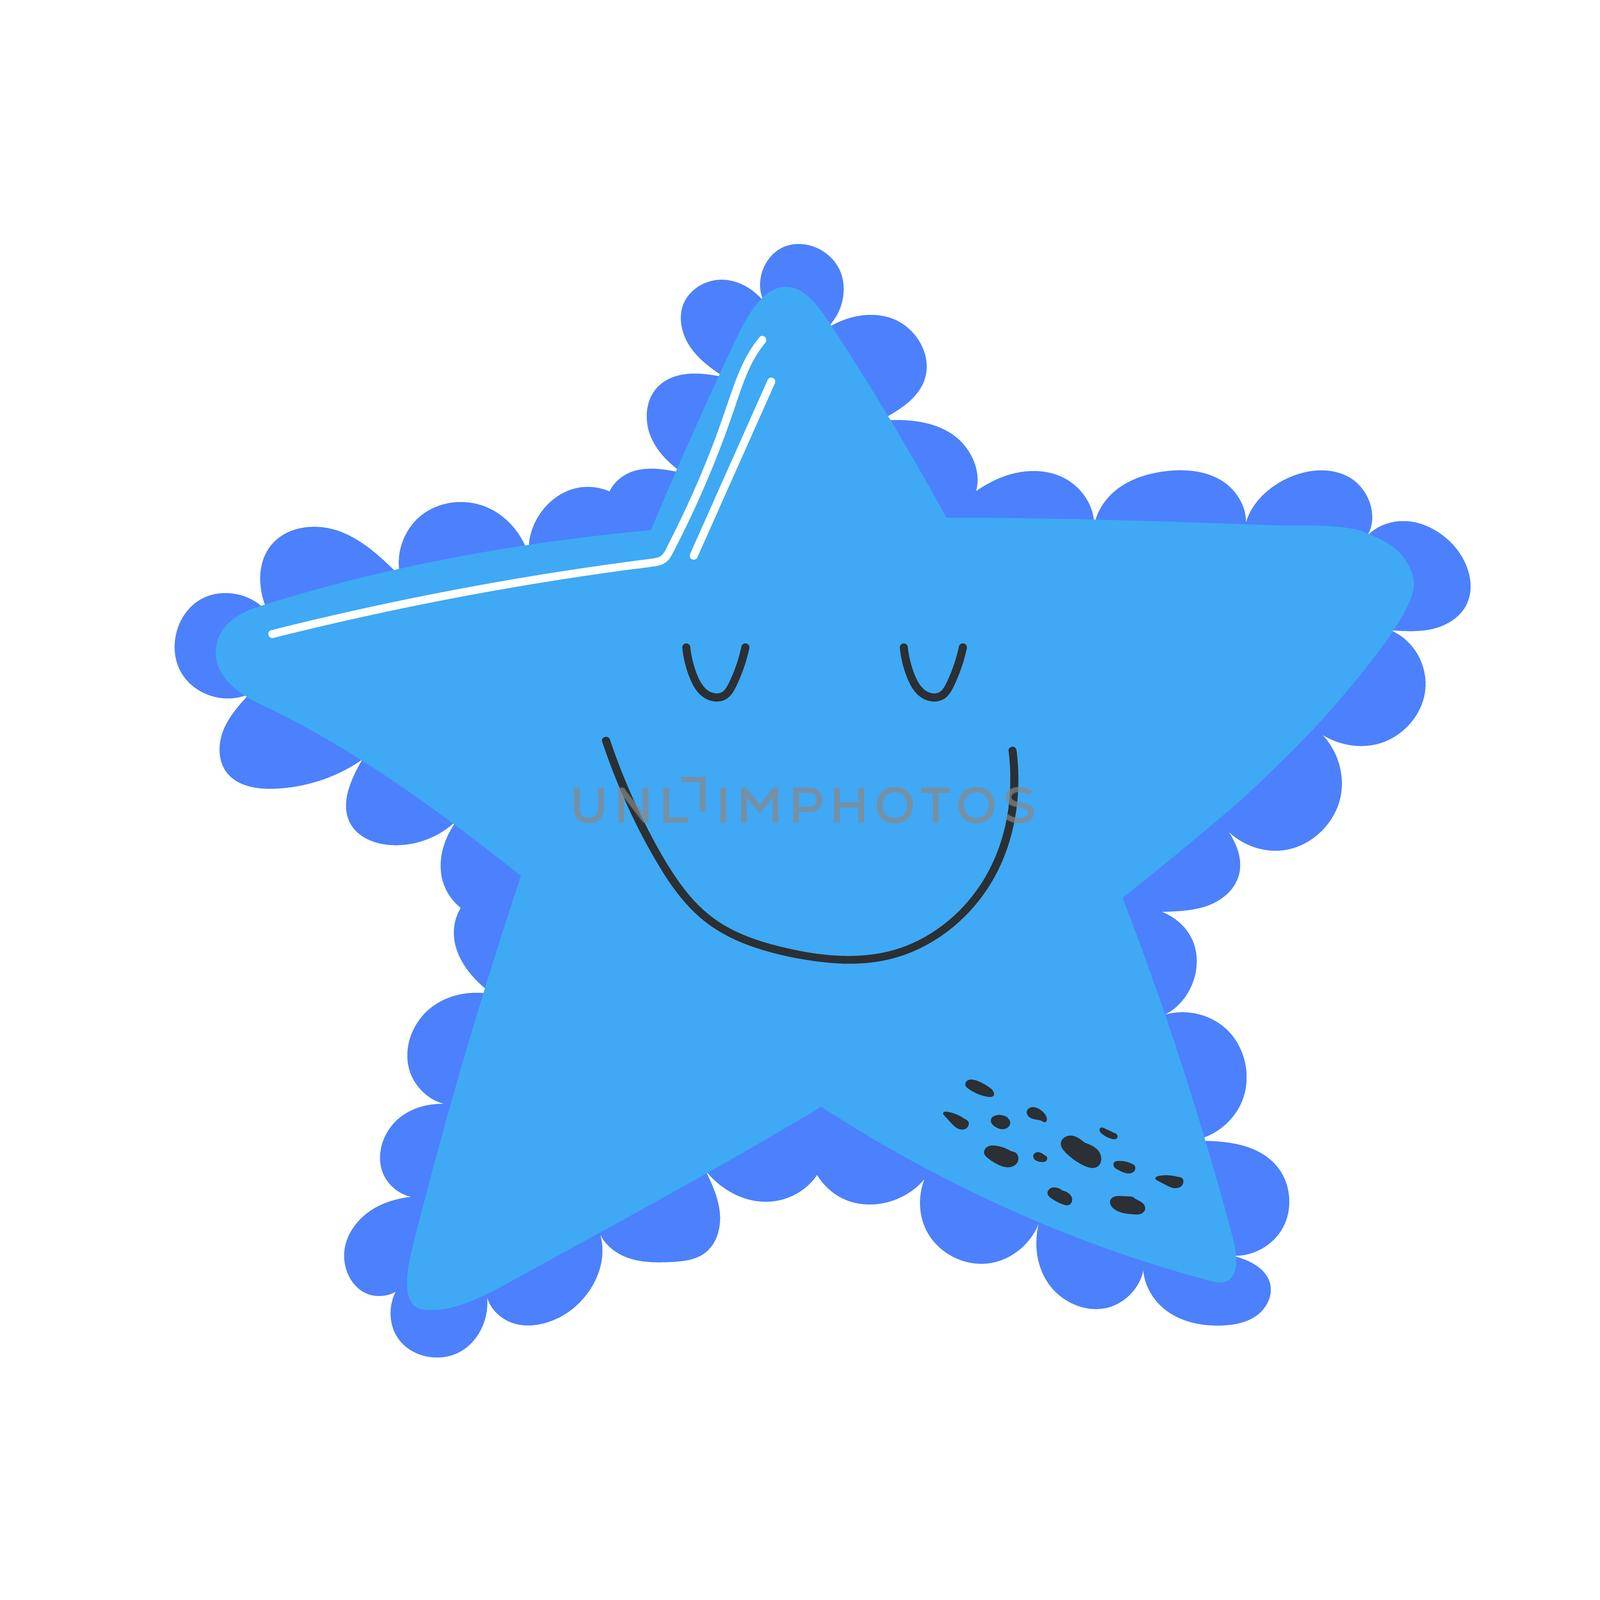 Starfish sea, vector isolated, hand drawing sketch in blue color. Cute character with face